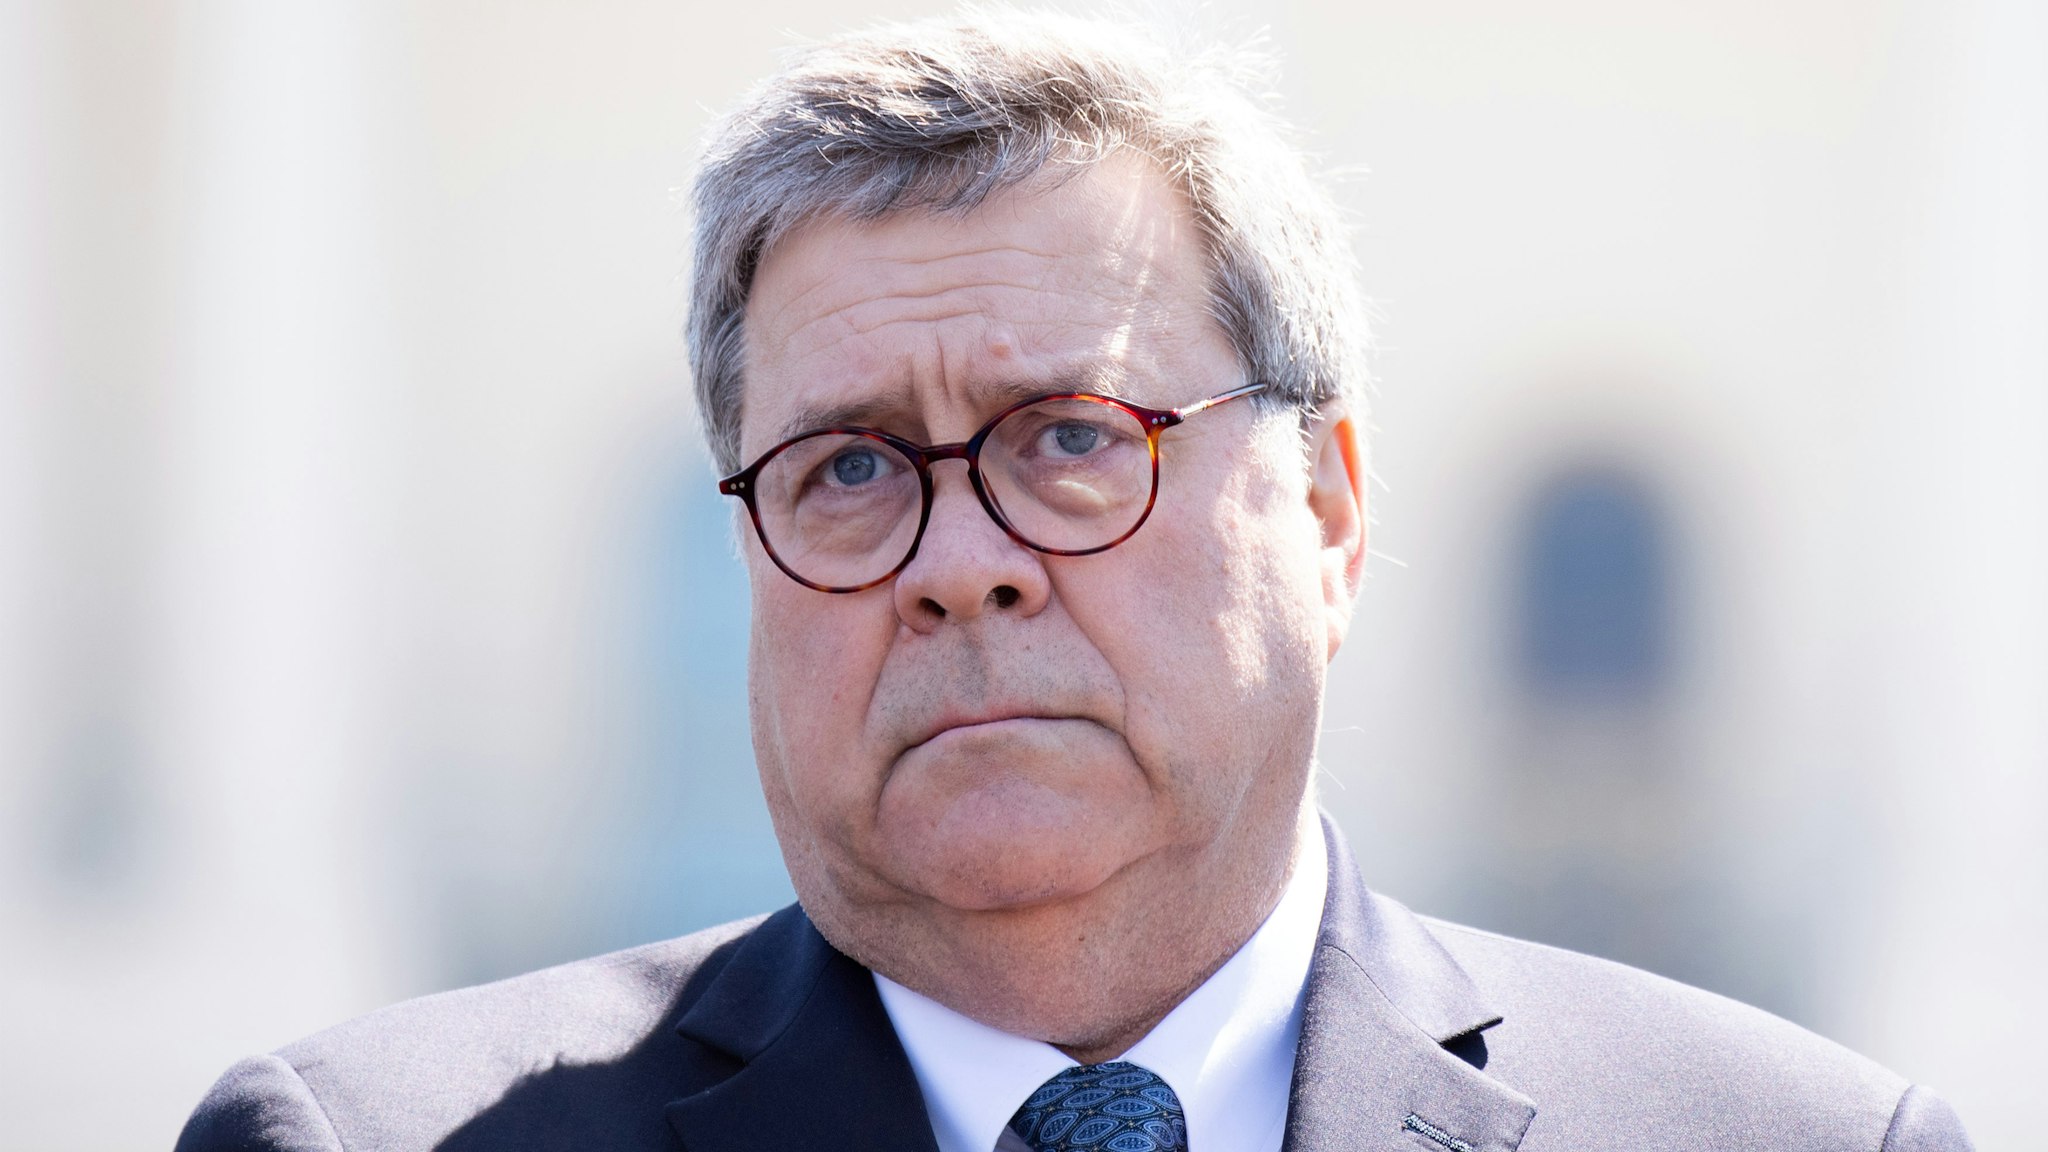 William Barr, U.S. attorney general, attends the 38th annual National Peace Officers Memorial Day service at the U.S. Capitol in Washington, D.C., U.S., on Wednesday, May 15, 2019. Trump is poised to delay a decision by up to six months to impose auto tariffs to avoid blowing up negotiations with the EU and Japan and further antagonizing allies as he ramps up his trade war with China, according to people close to the discussions.